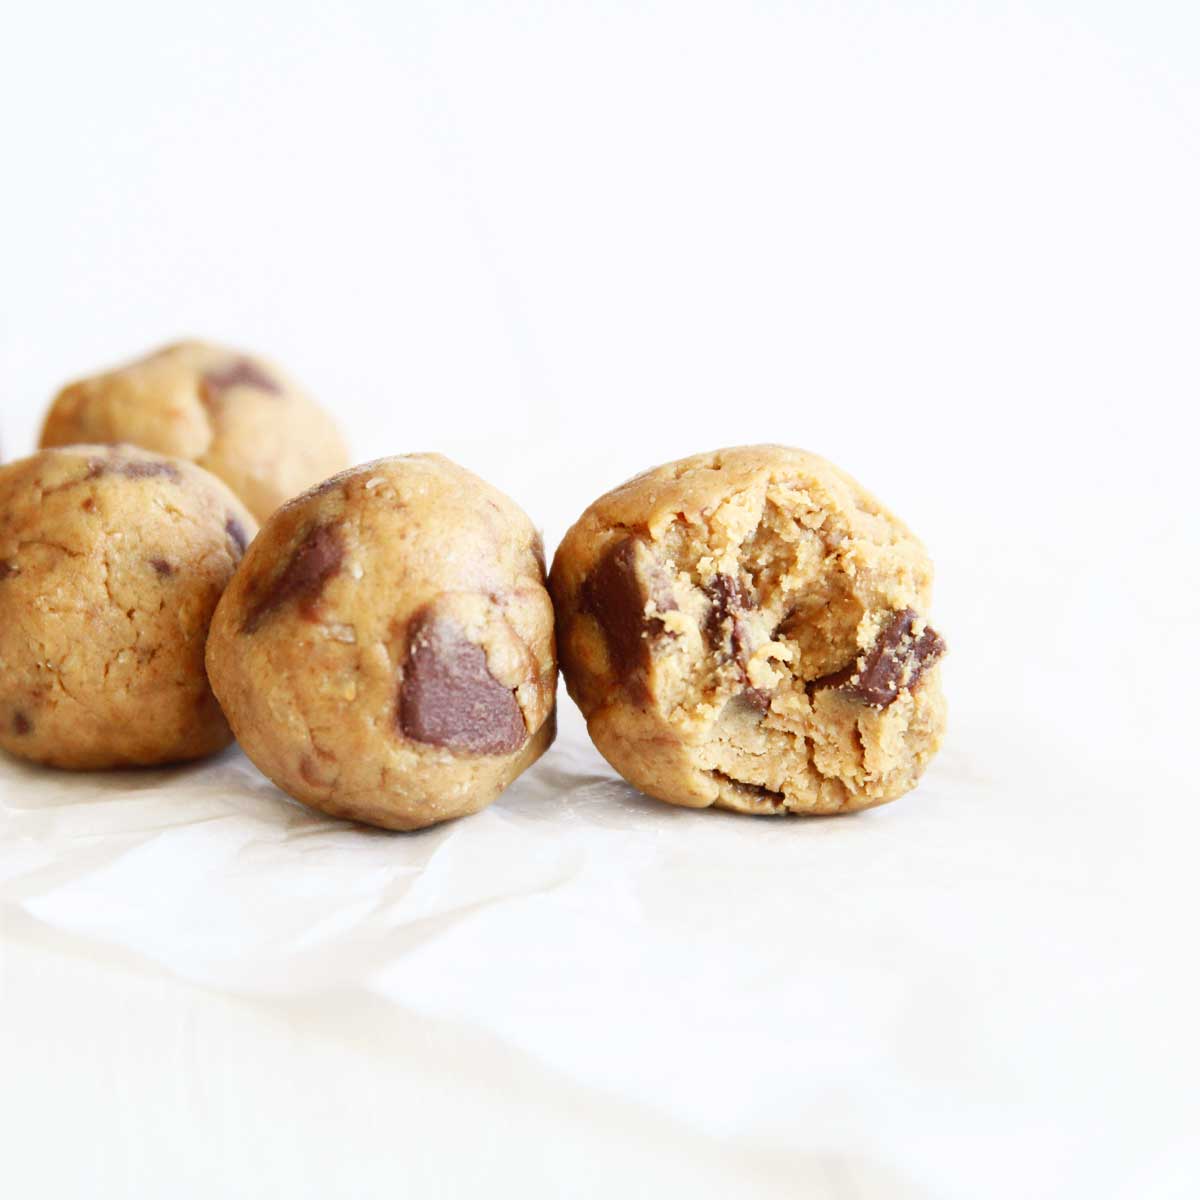 Peanut Butter Cookie Dough Protein Balls (No-Bake, Vegan Recipe with Oats) - yeast bread